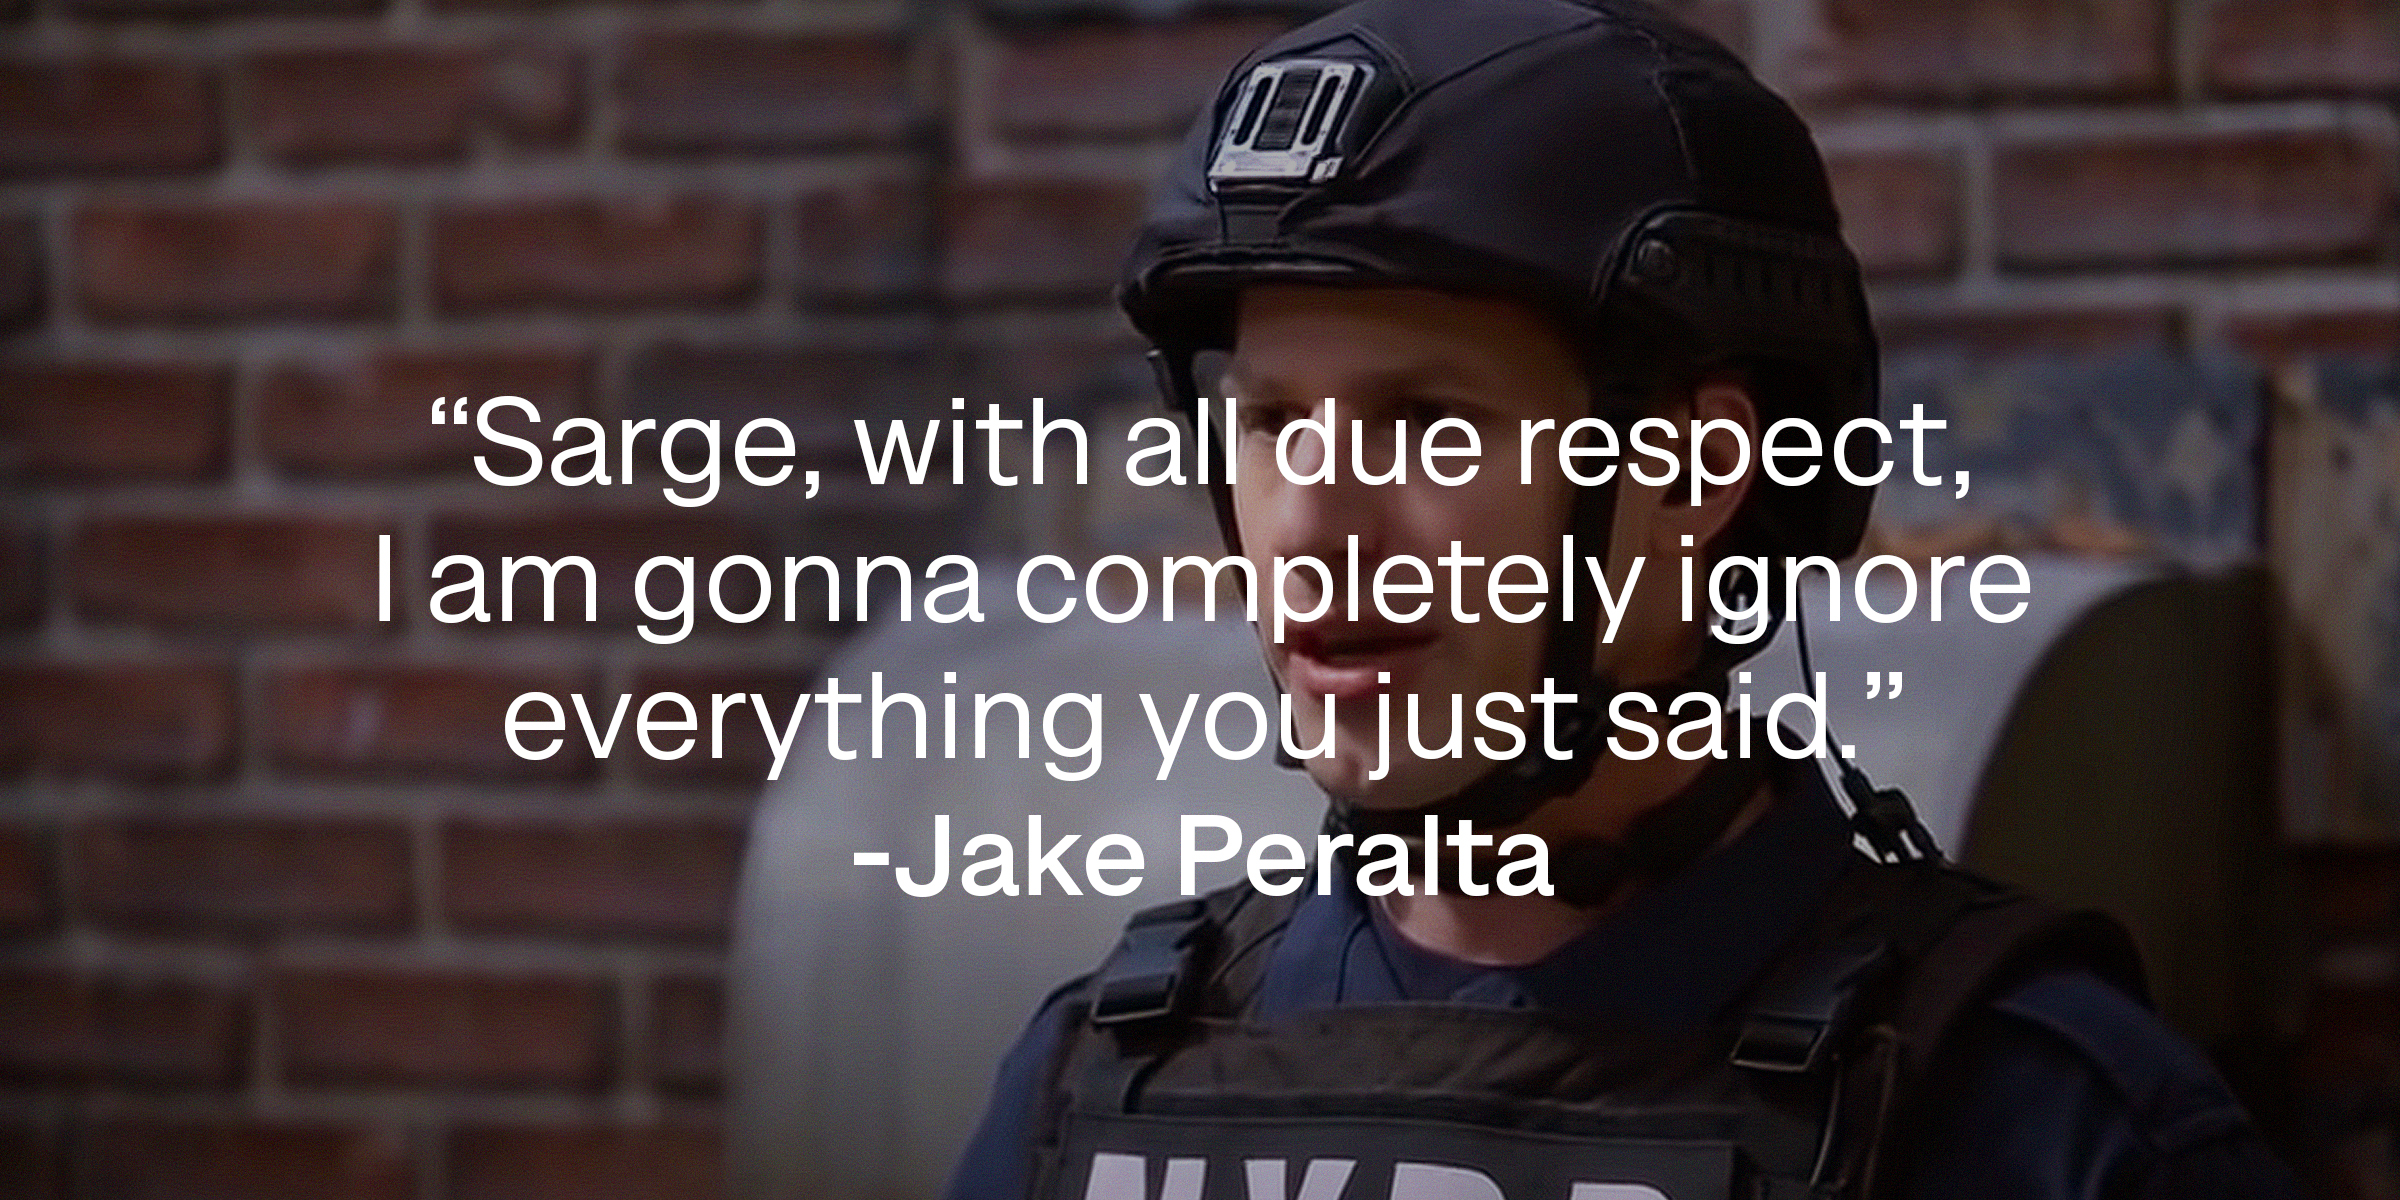 A picture of Jake Peralta with his quote: "Sarge, with all due respect, I am gonna completely ignore everything you just said." | Source: youtube.com/NBCBrooklyn99